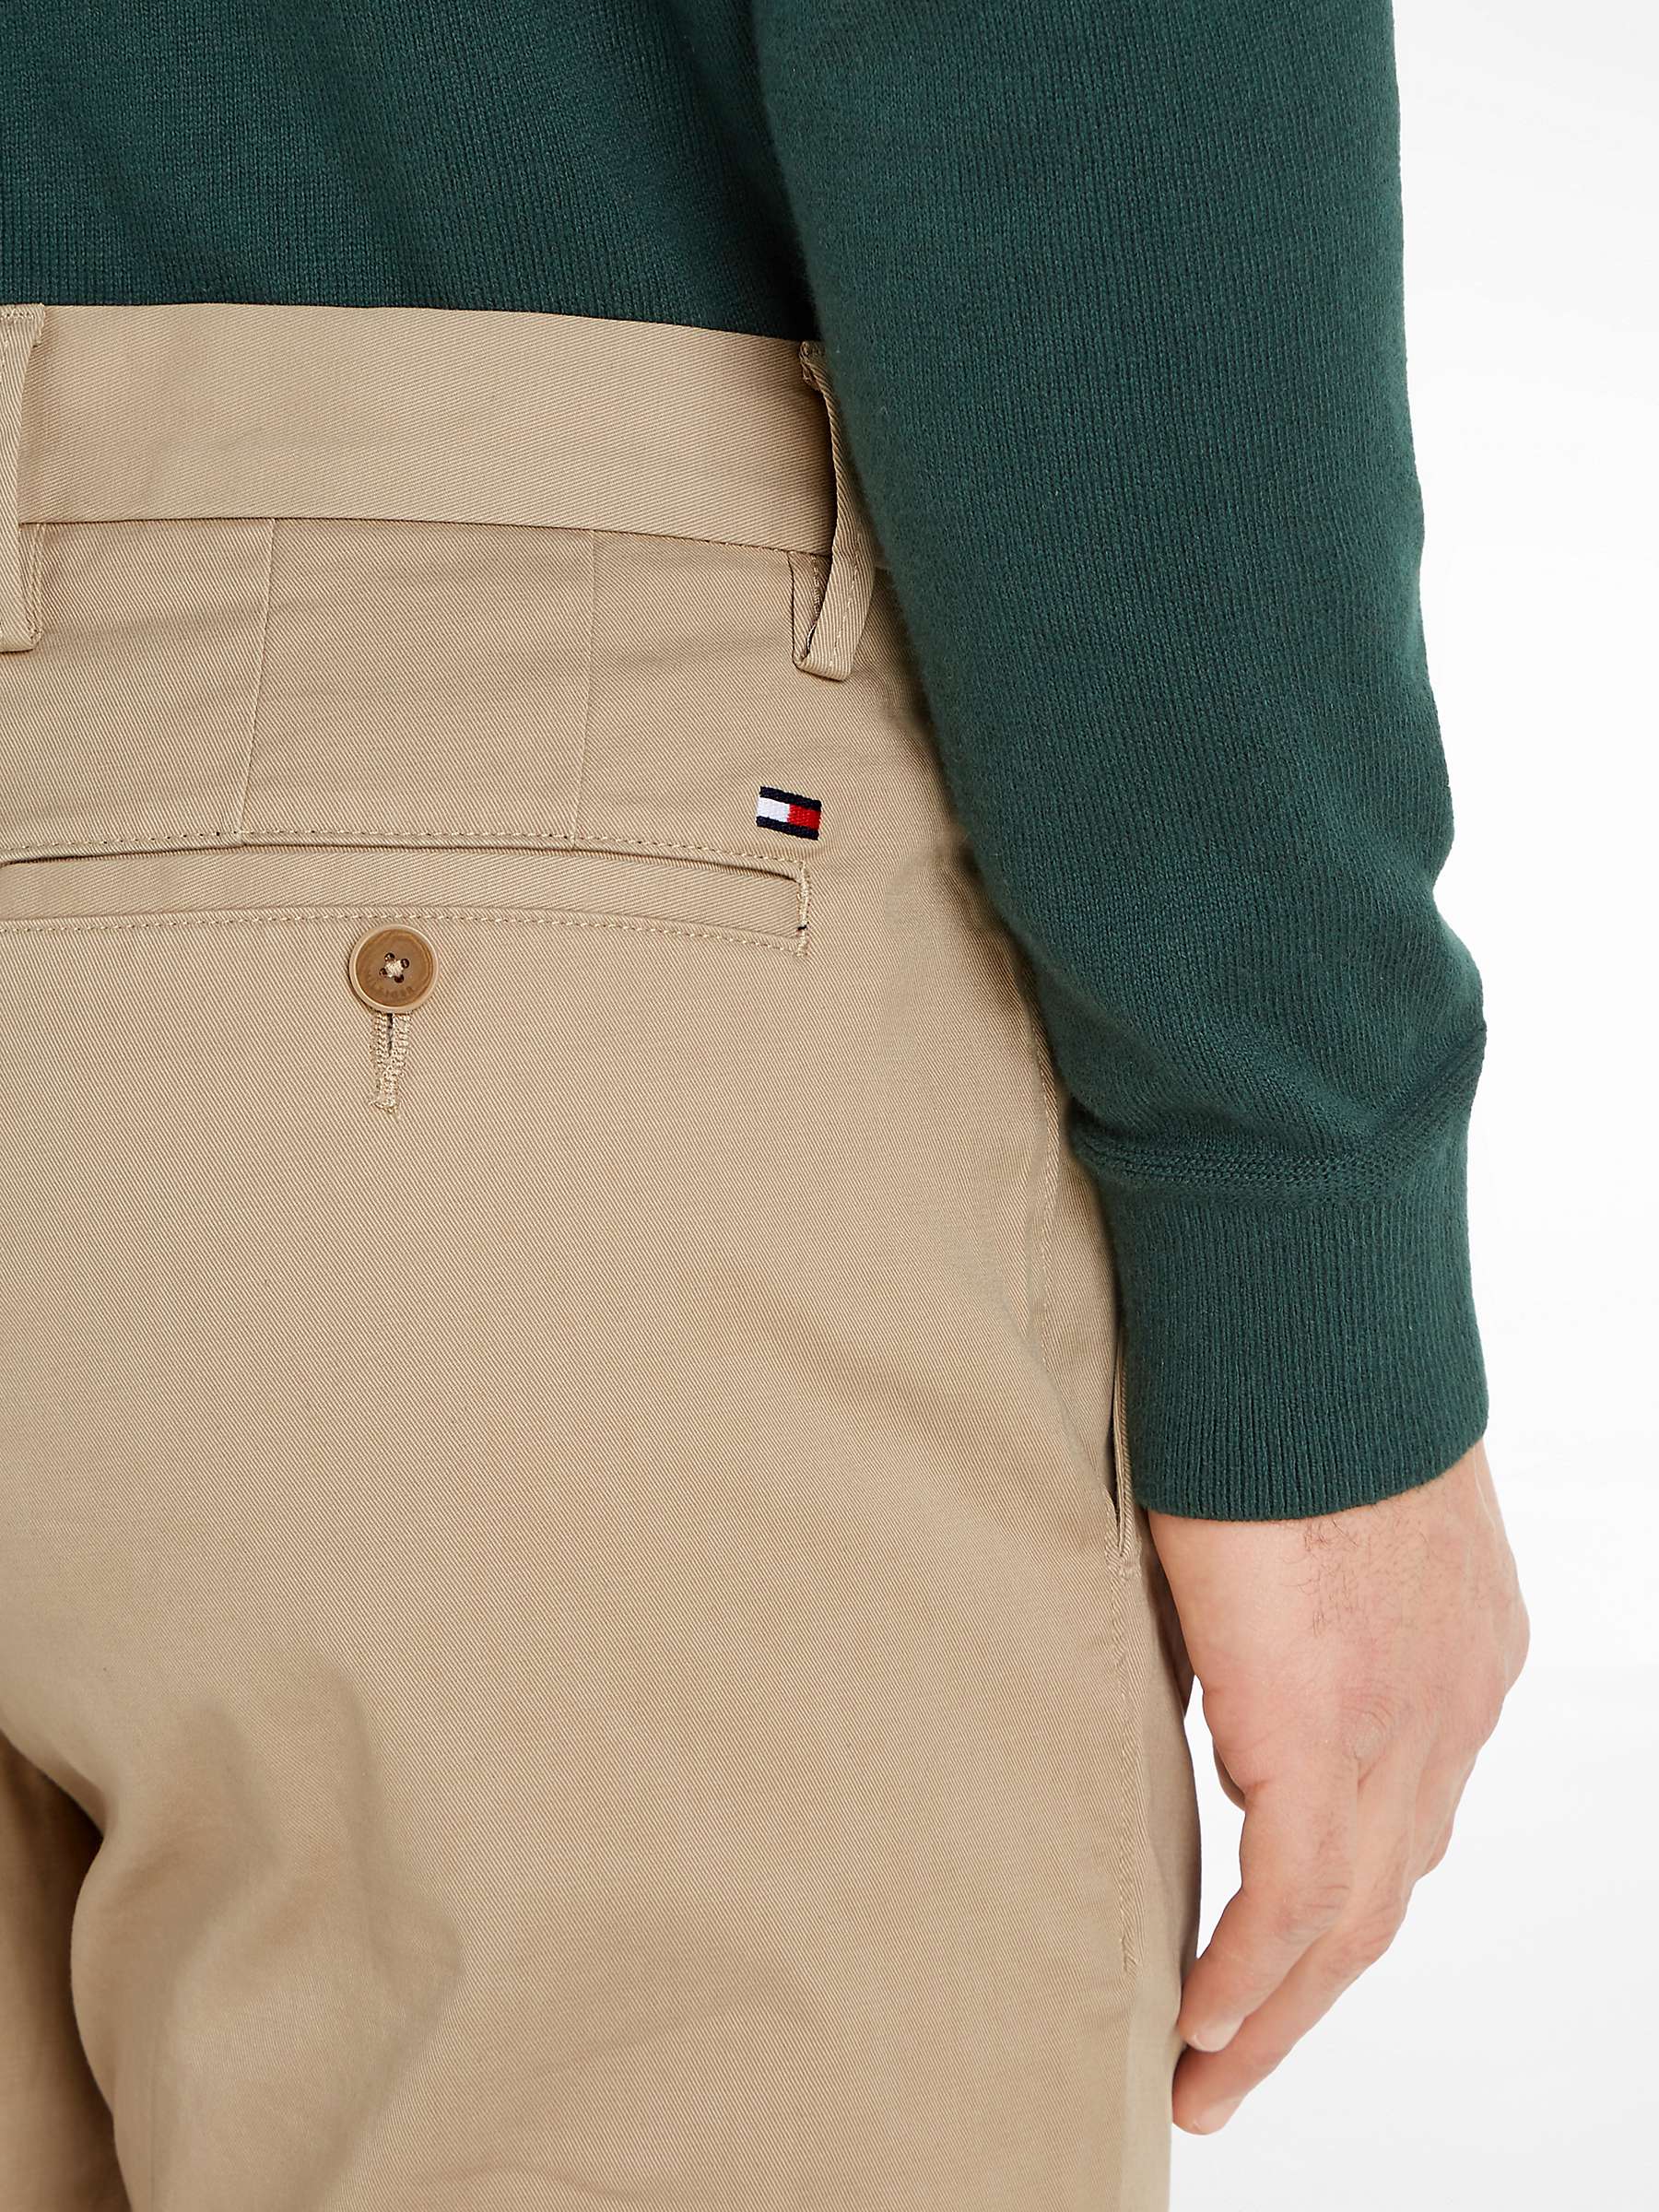 Buy Tommy Hilfiger Straight Fit Bleecker Chinos Online at johnlewis.com